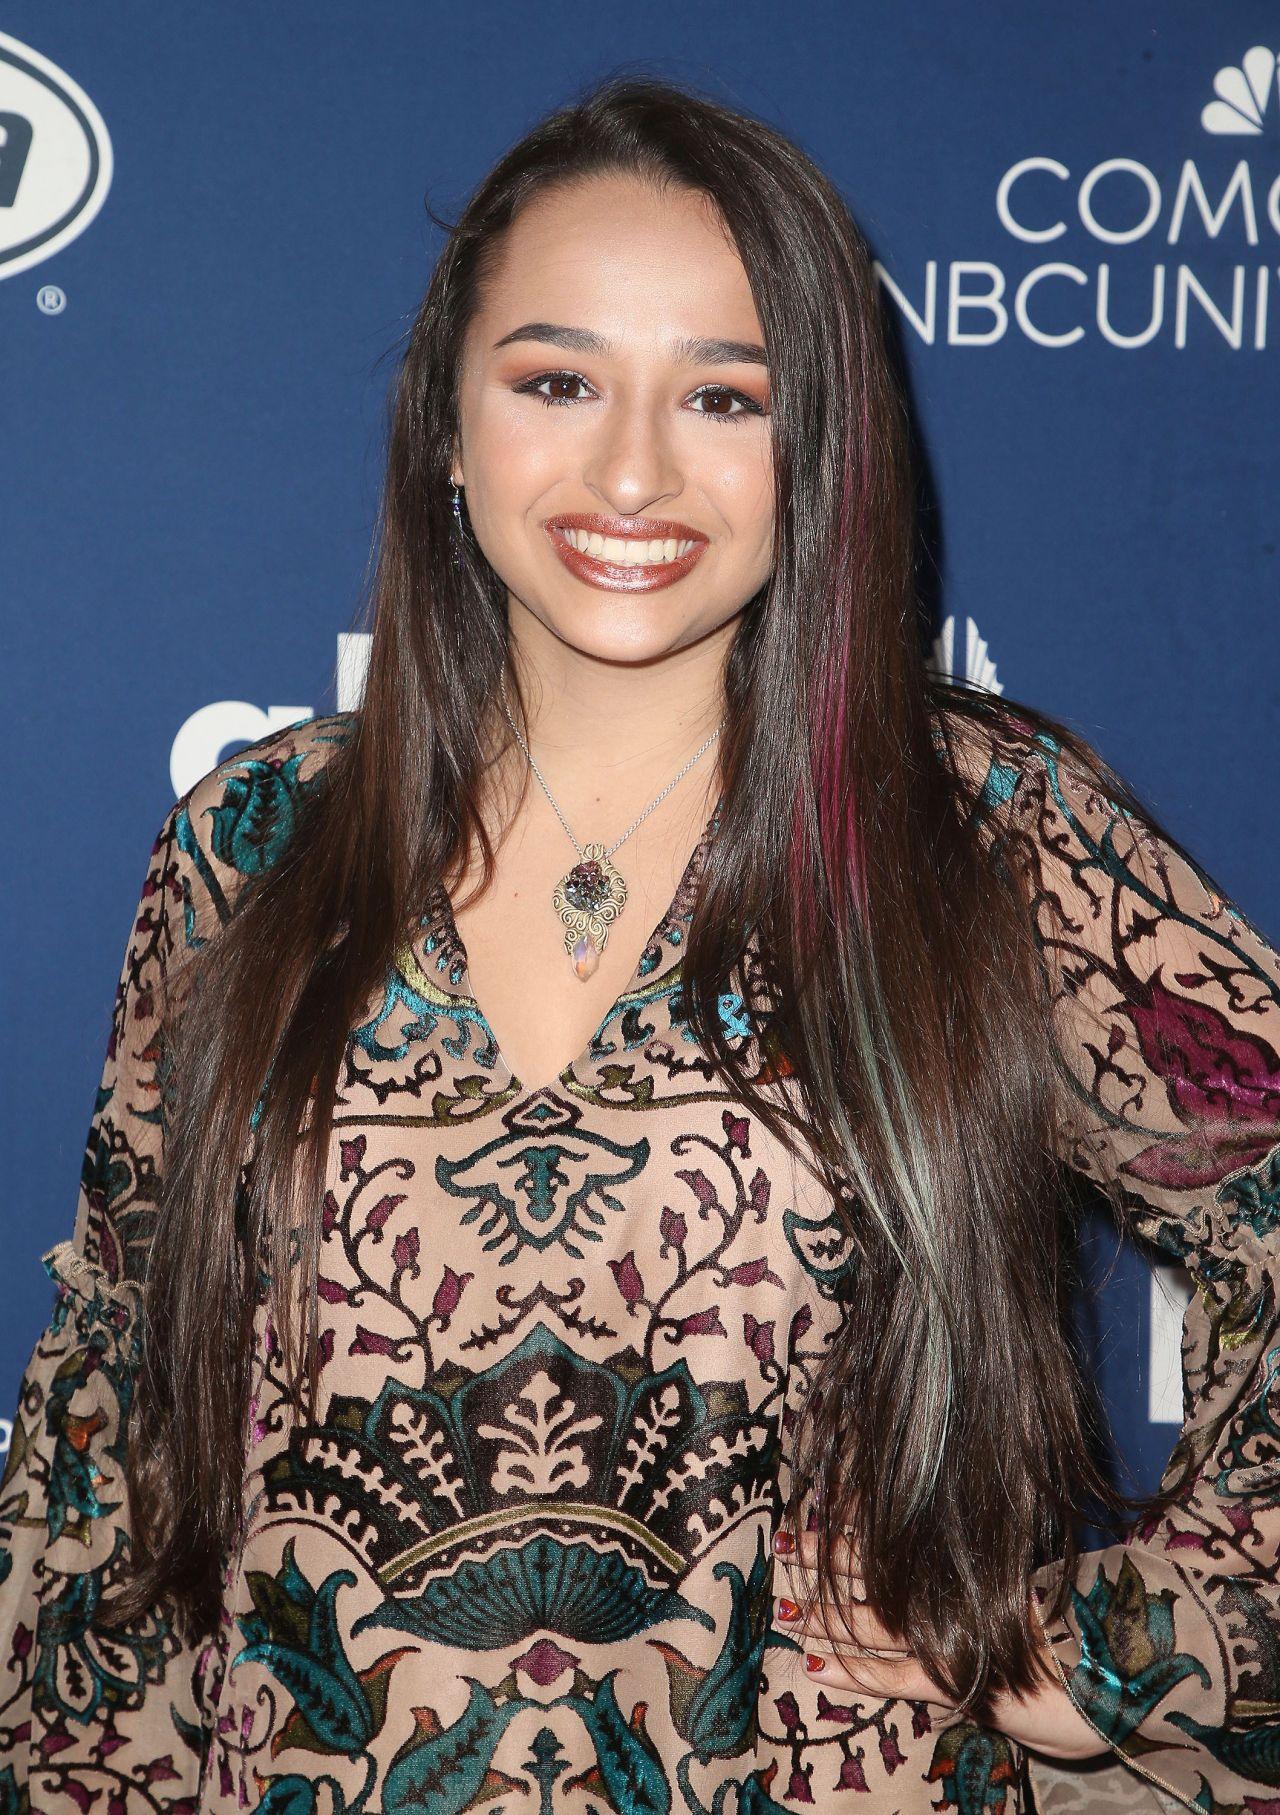 70+ Hot Pictures Of Jazz Jennings Which Will Make Your Mouth Water 19